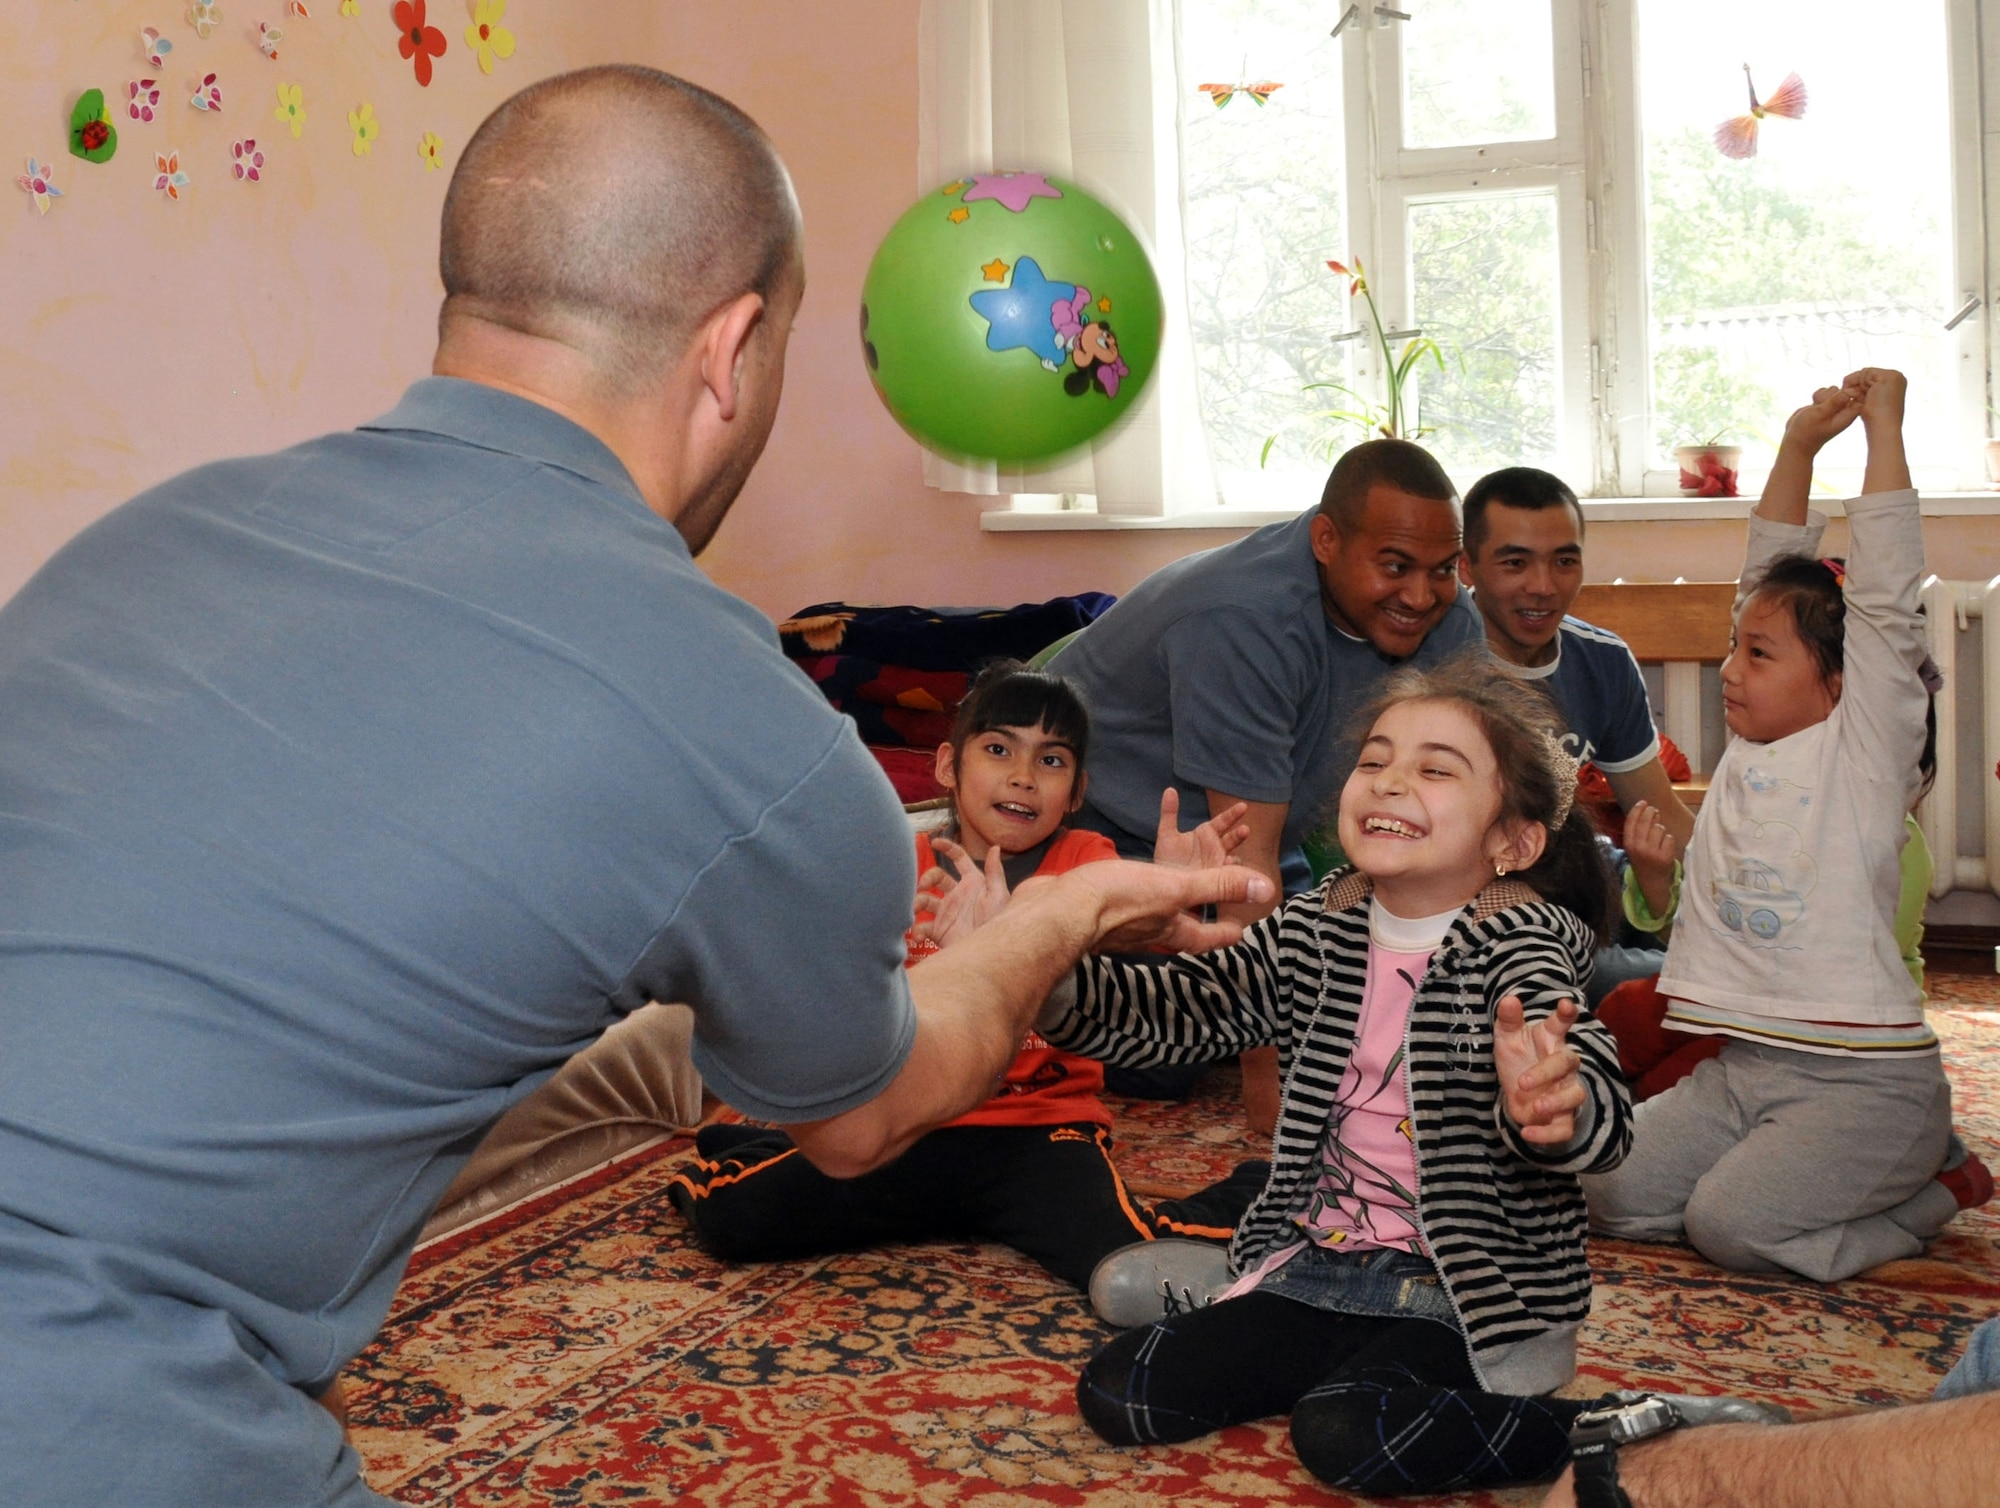 Jeff Villemarette, an Airman from the Transit Center at Manas, Kyrgyzstan, plays with children at the Nadjeshda Children's Center April 27, 2010. Nadjeshda is home for 60 children and teenagers.  With the help of adults, children there are able to learn to sign, draw, study, work and have fun using various methods of therapy. U.S. Airmen have supported Nadjeshda for the last six years, helping rebuild and repair the facility and spending time with the children. (U.S. Air Force photo/Staff Sgt. Carolyn Viss)